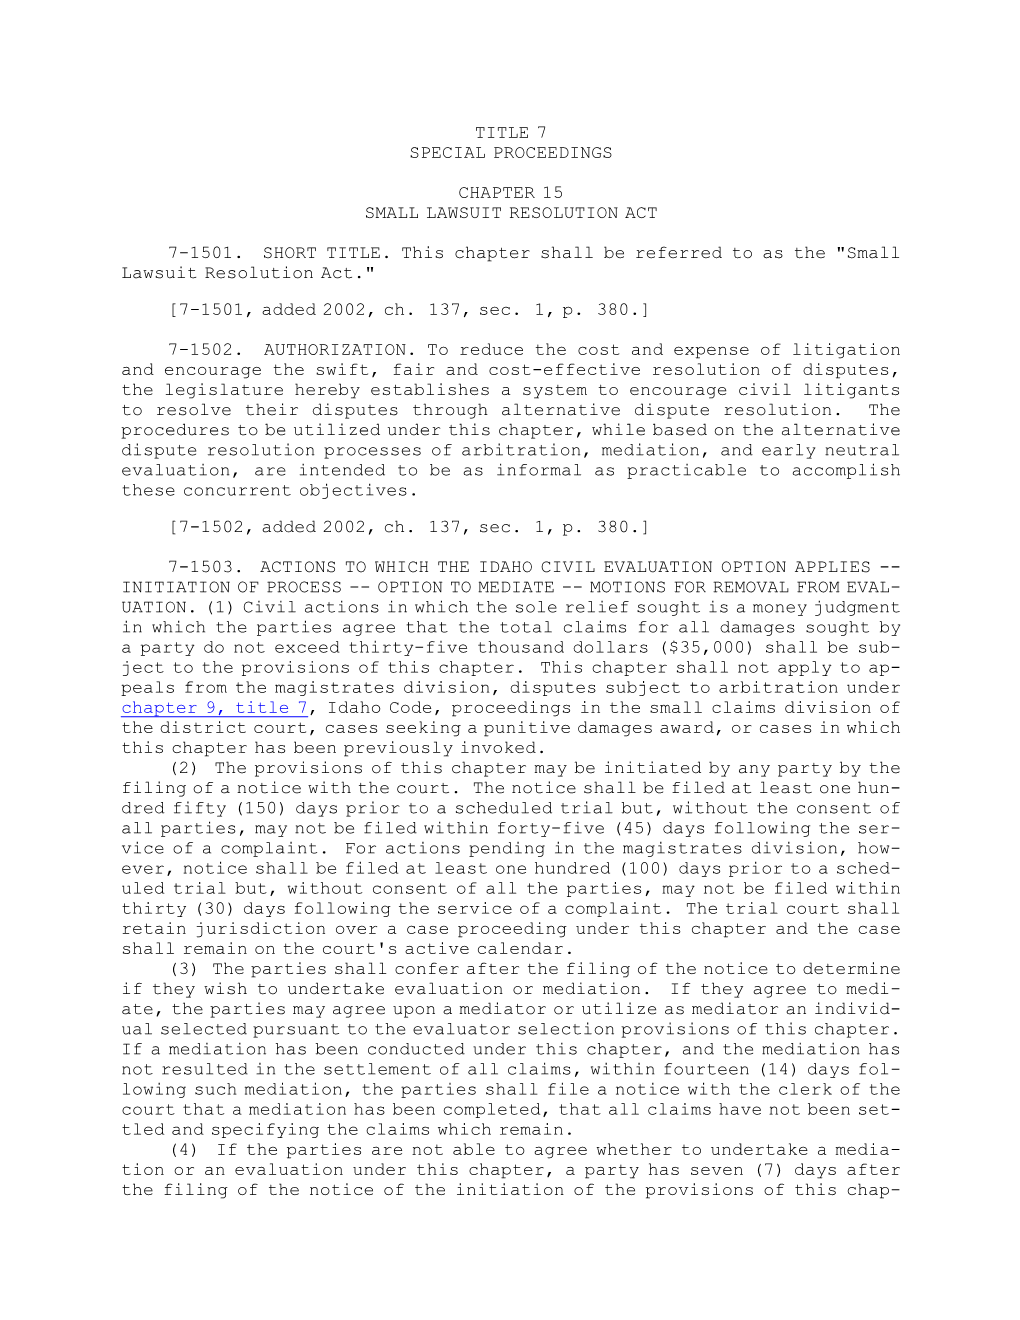 Title 7 Special Proceedings Chapter 15 Small Lawsuit